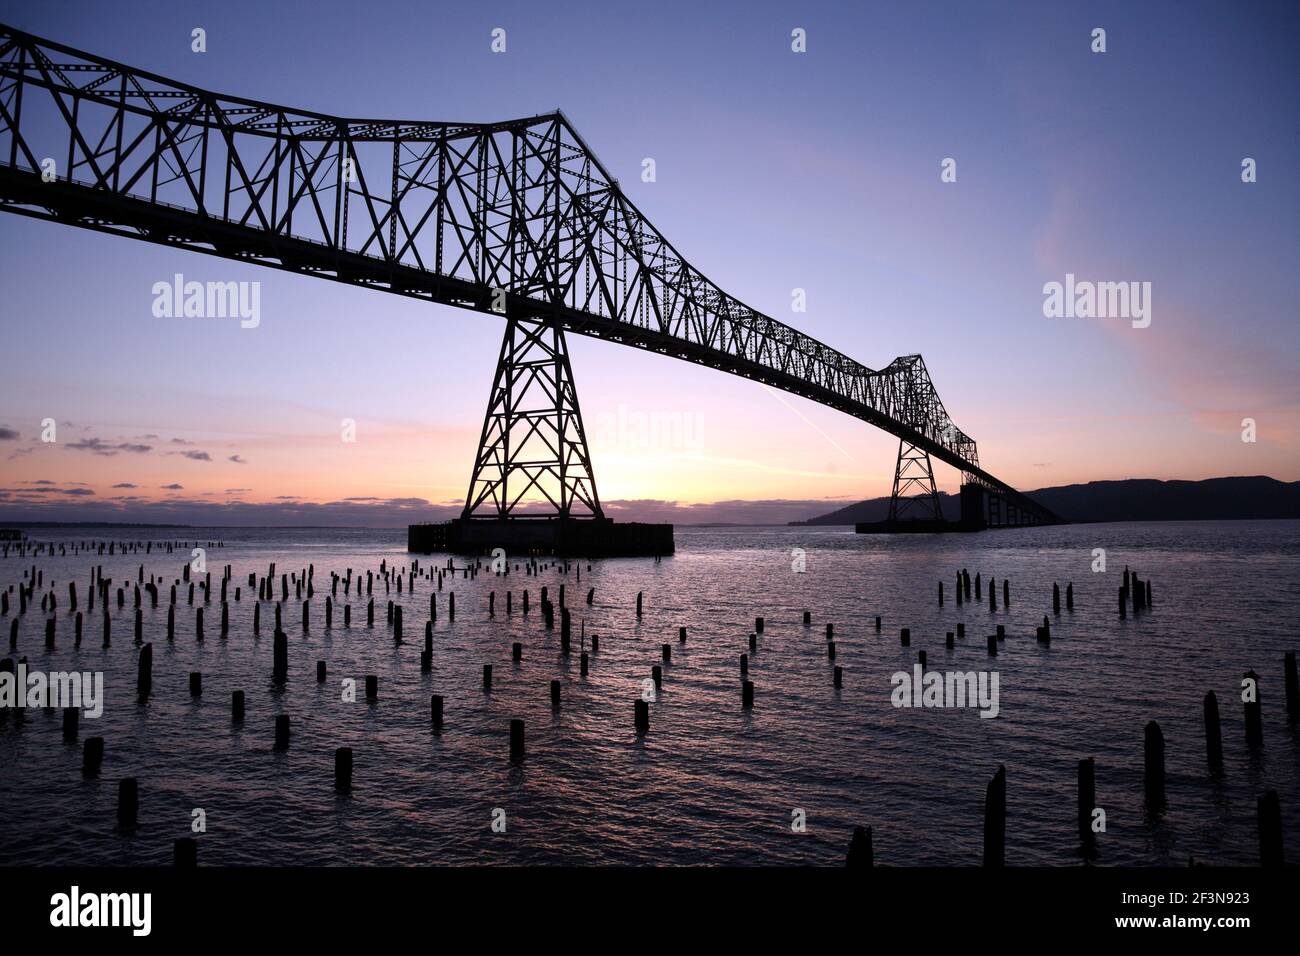 The Astoria-Megler Bridge is a continuous truss bridge that spans the mouth of the Columbia River between Astoria, Oregon and Point Ellice near Megler Stock Photo